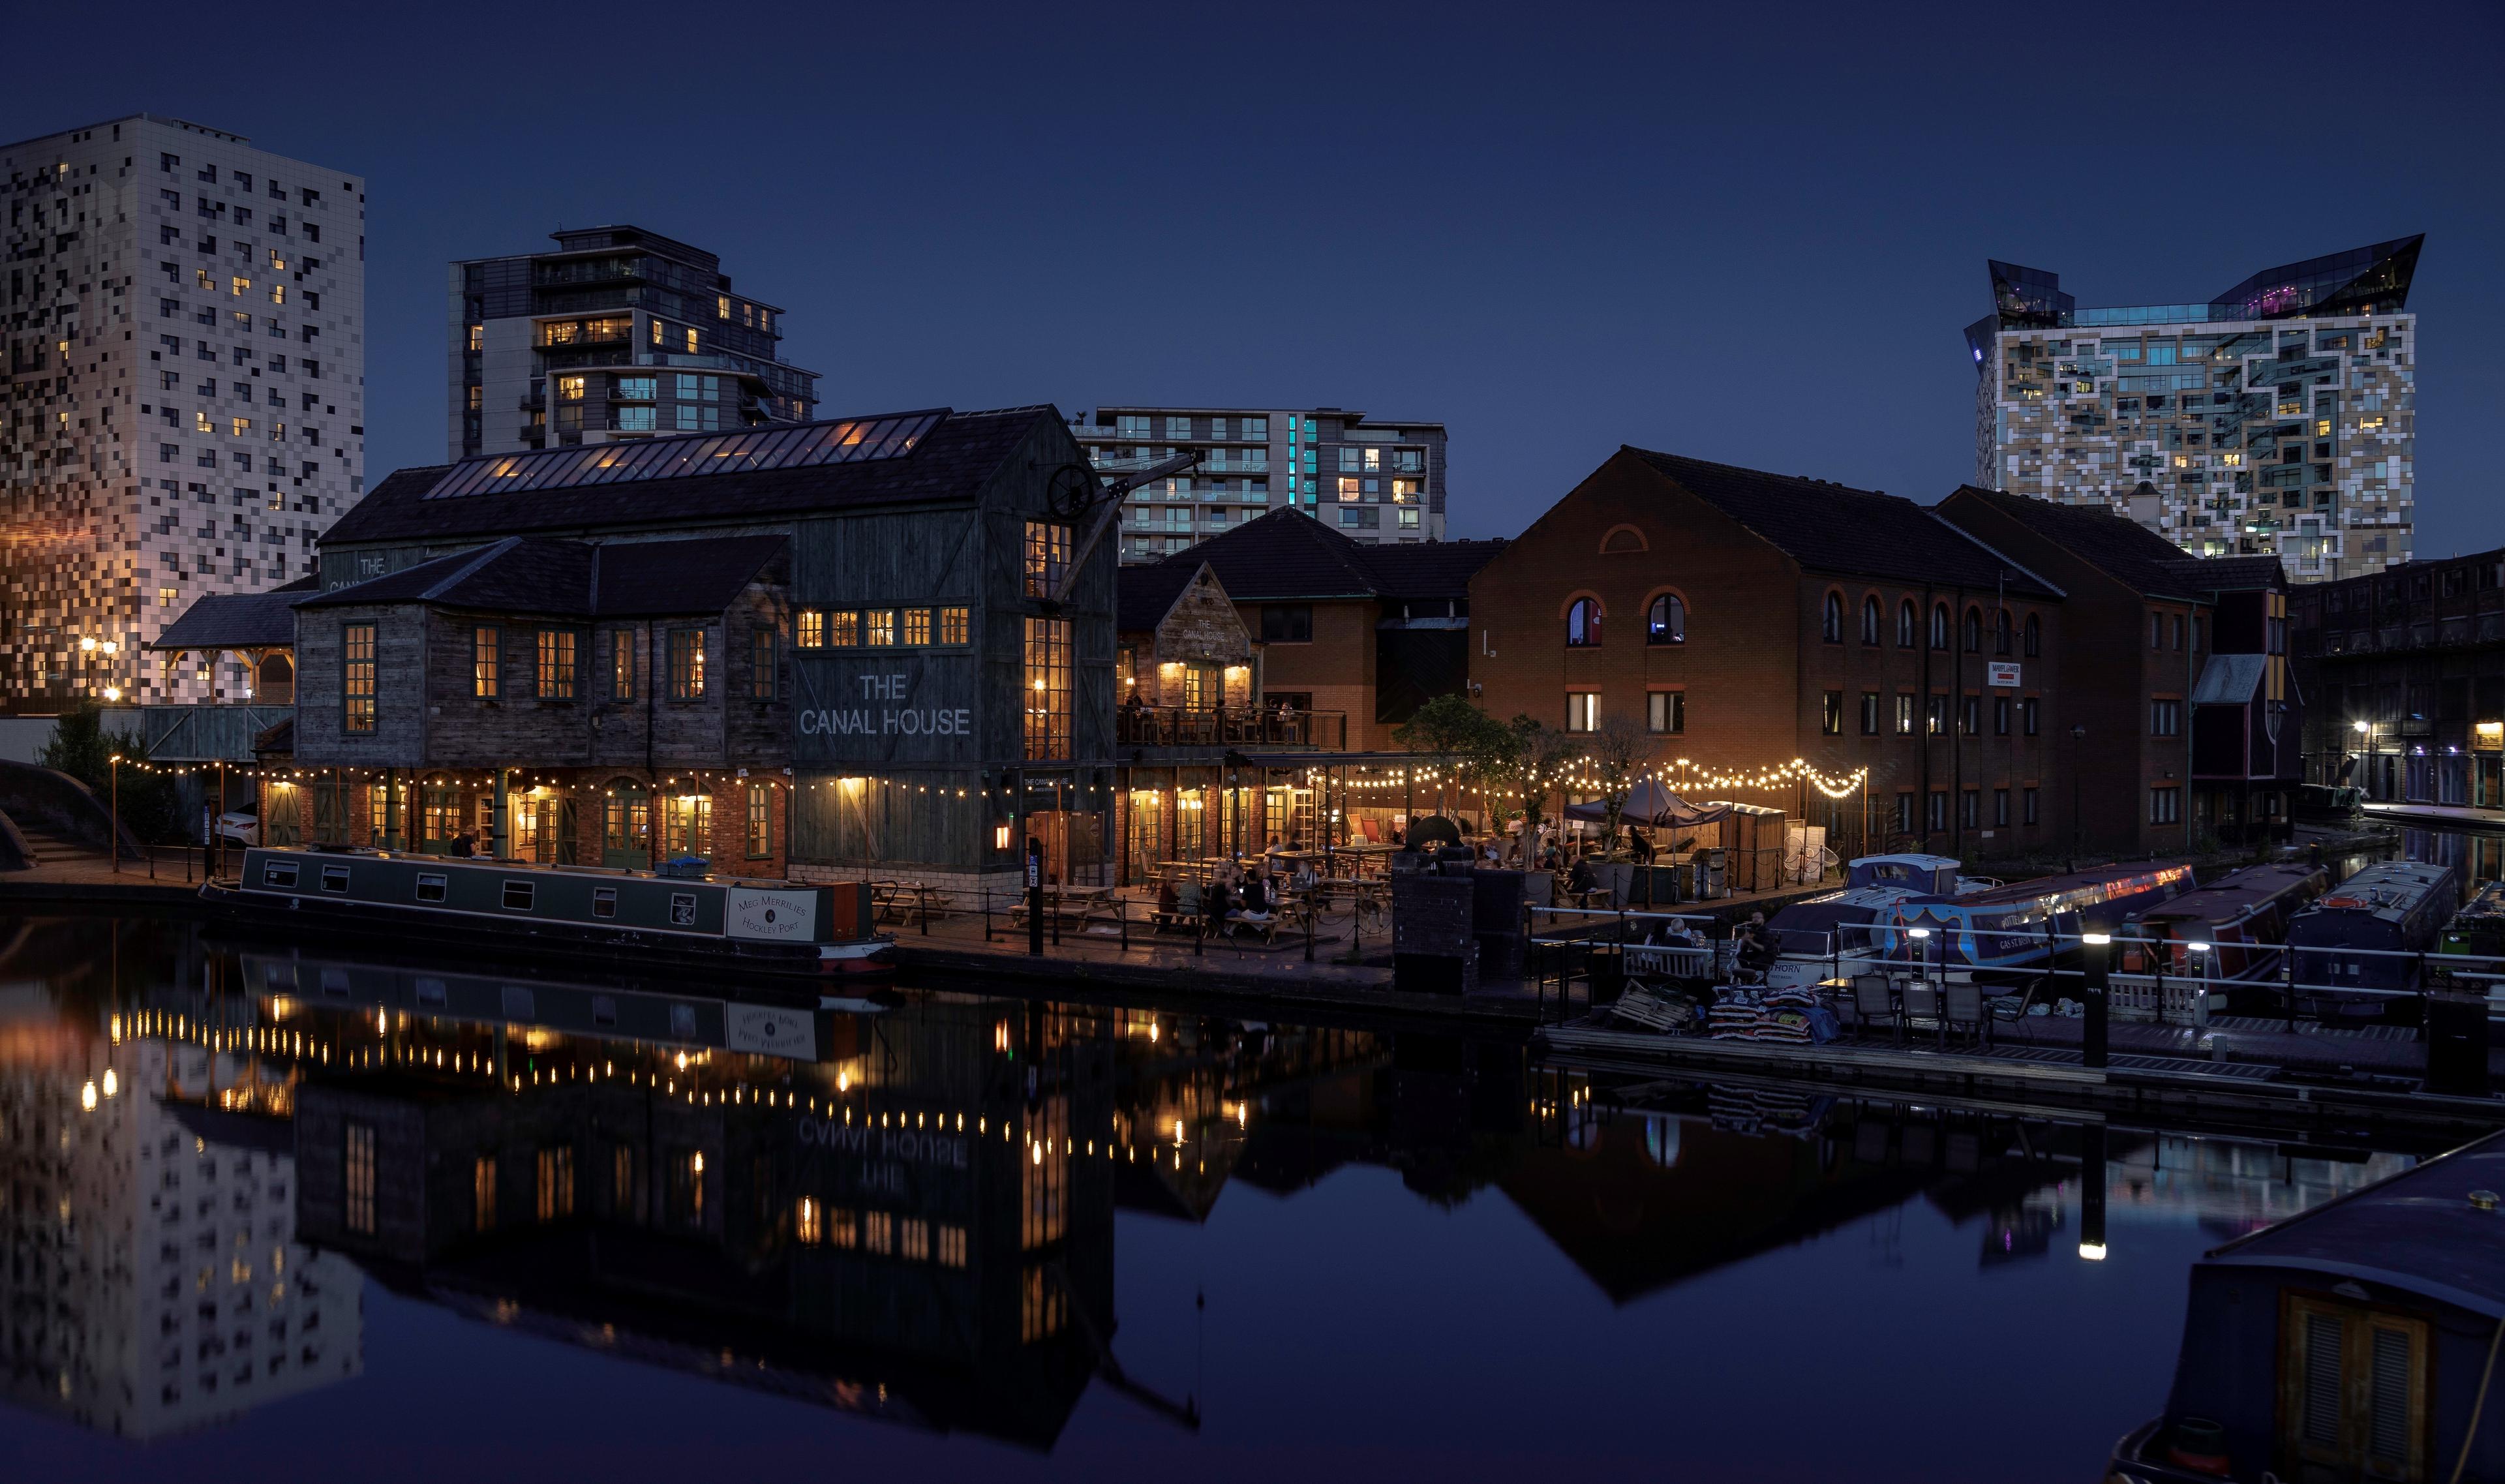 The Brindley, The Canal House Birmingham photo #2